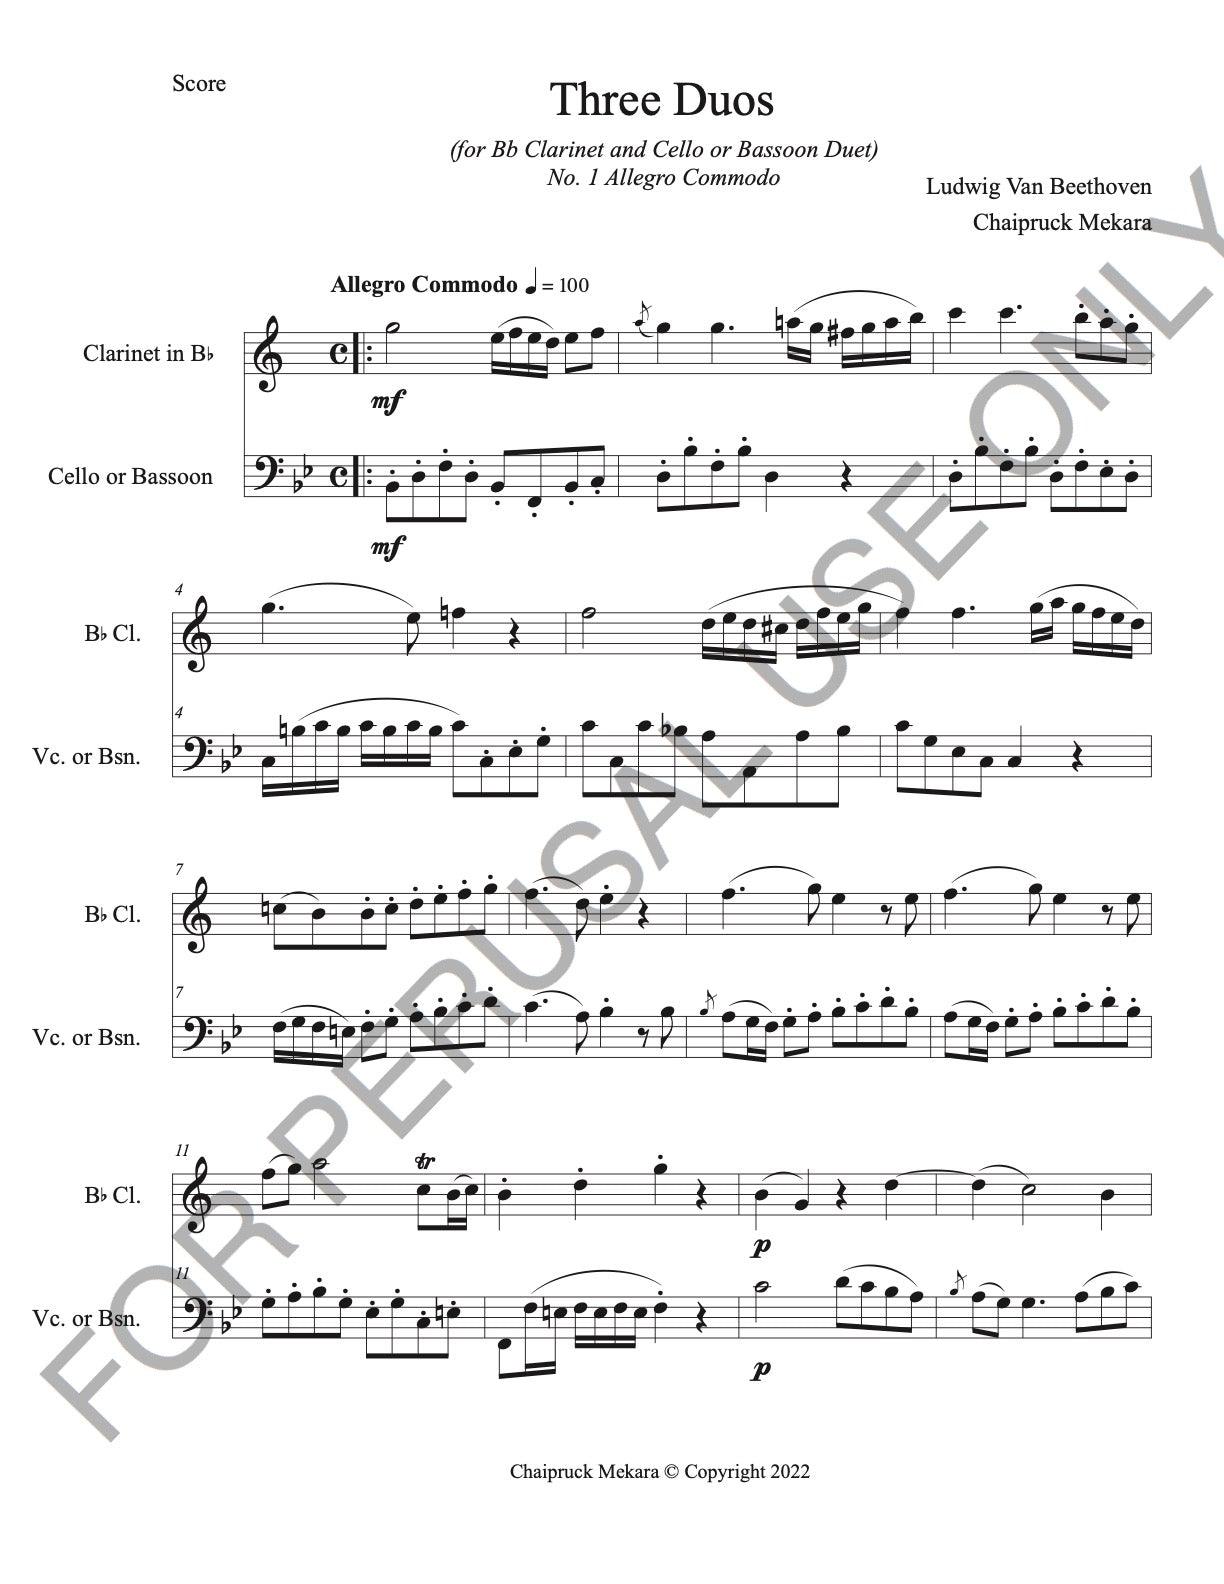 Clarinet and Cello/Bassoon Duet sheet music:Three Duos No.1 by Beethoven - ChaipruckMekara